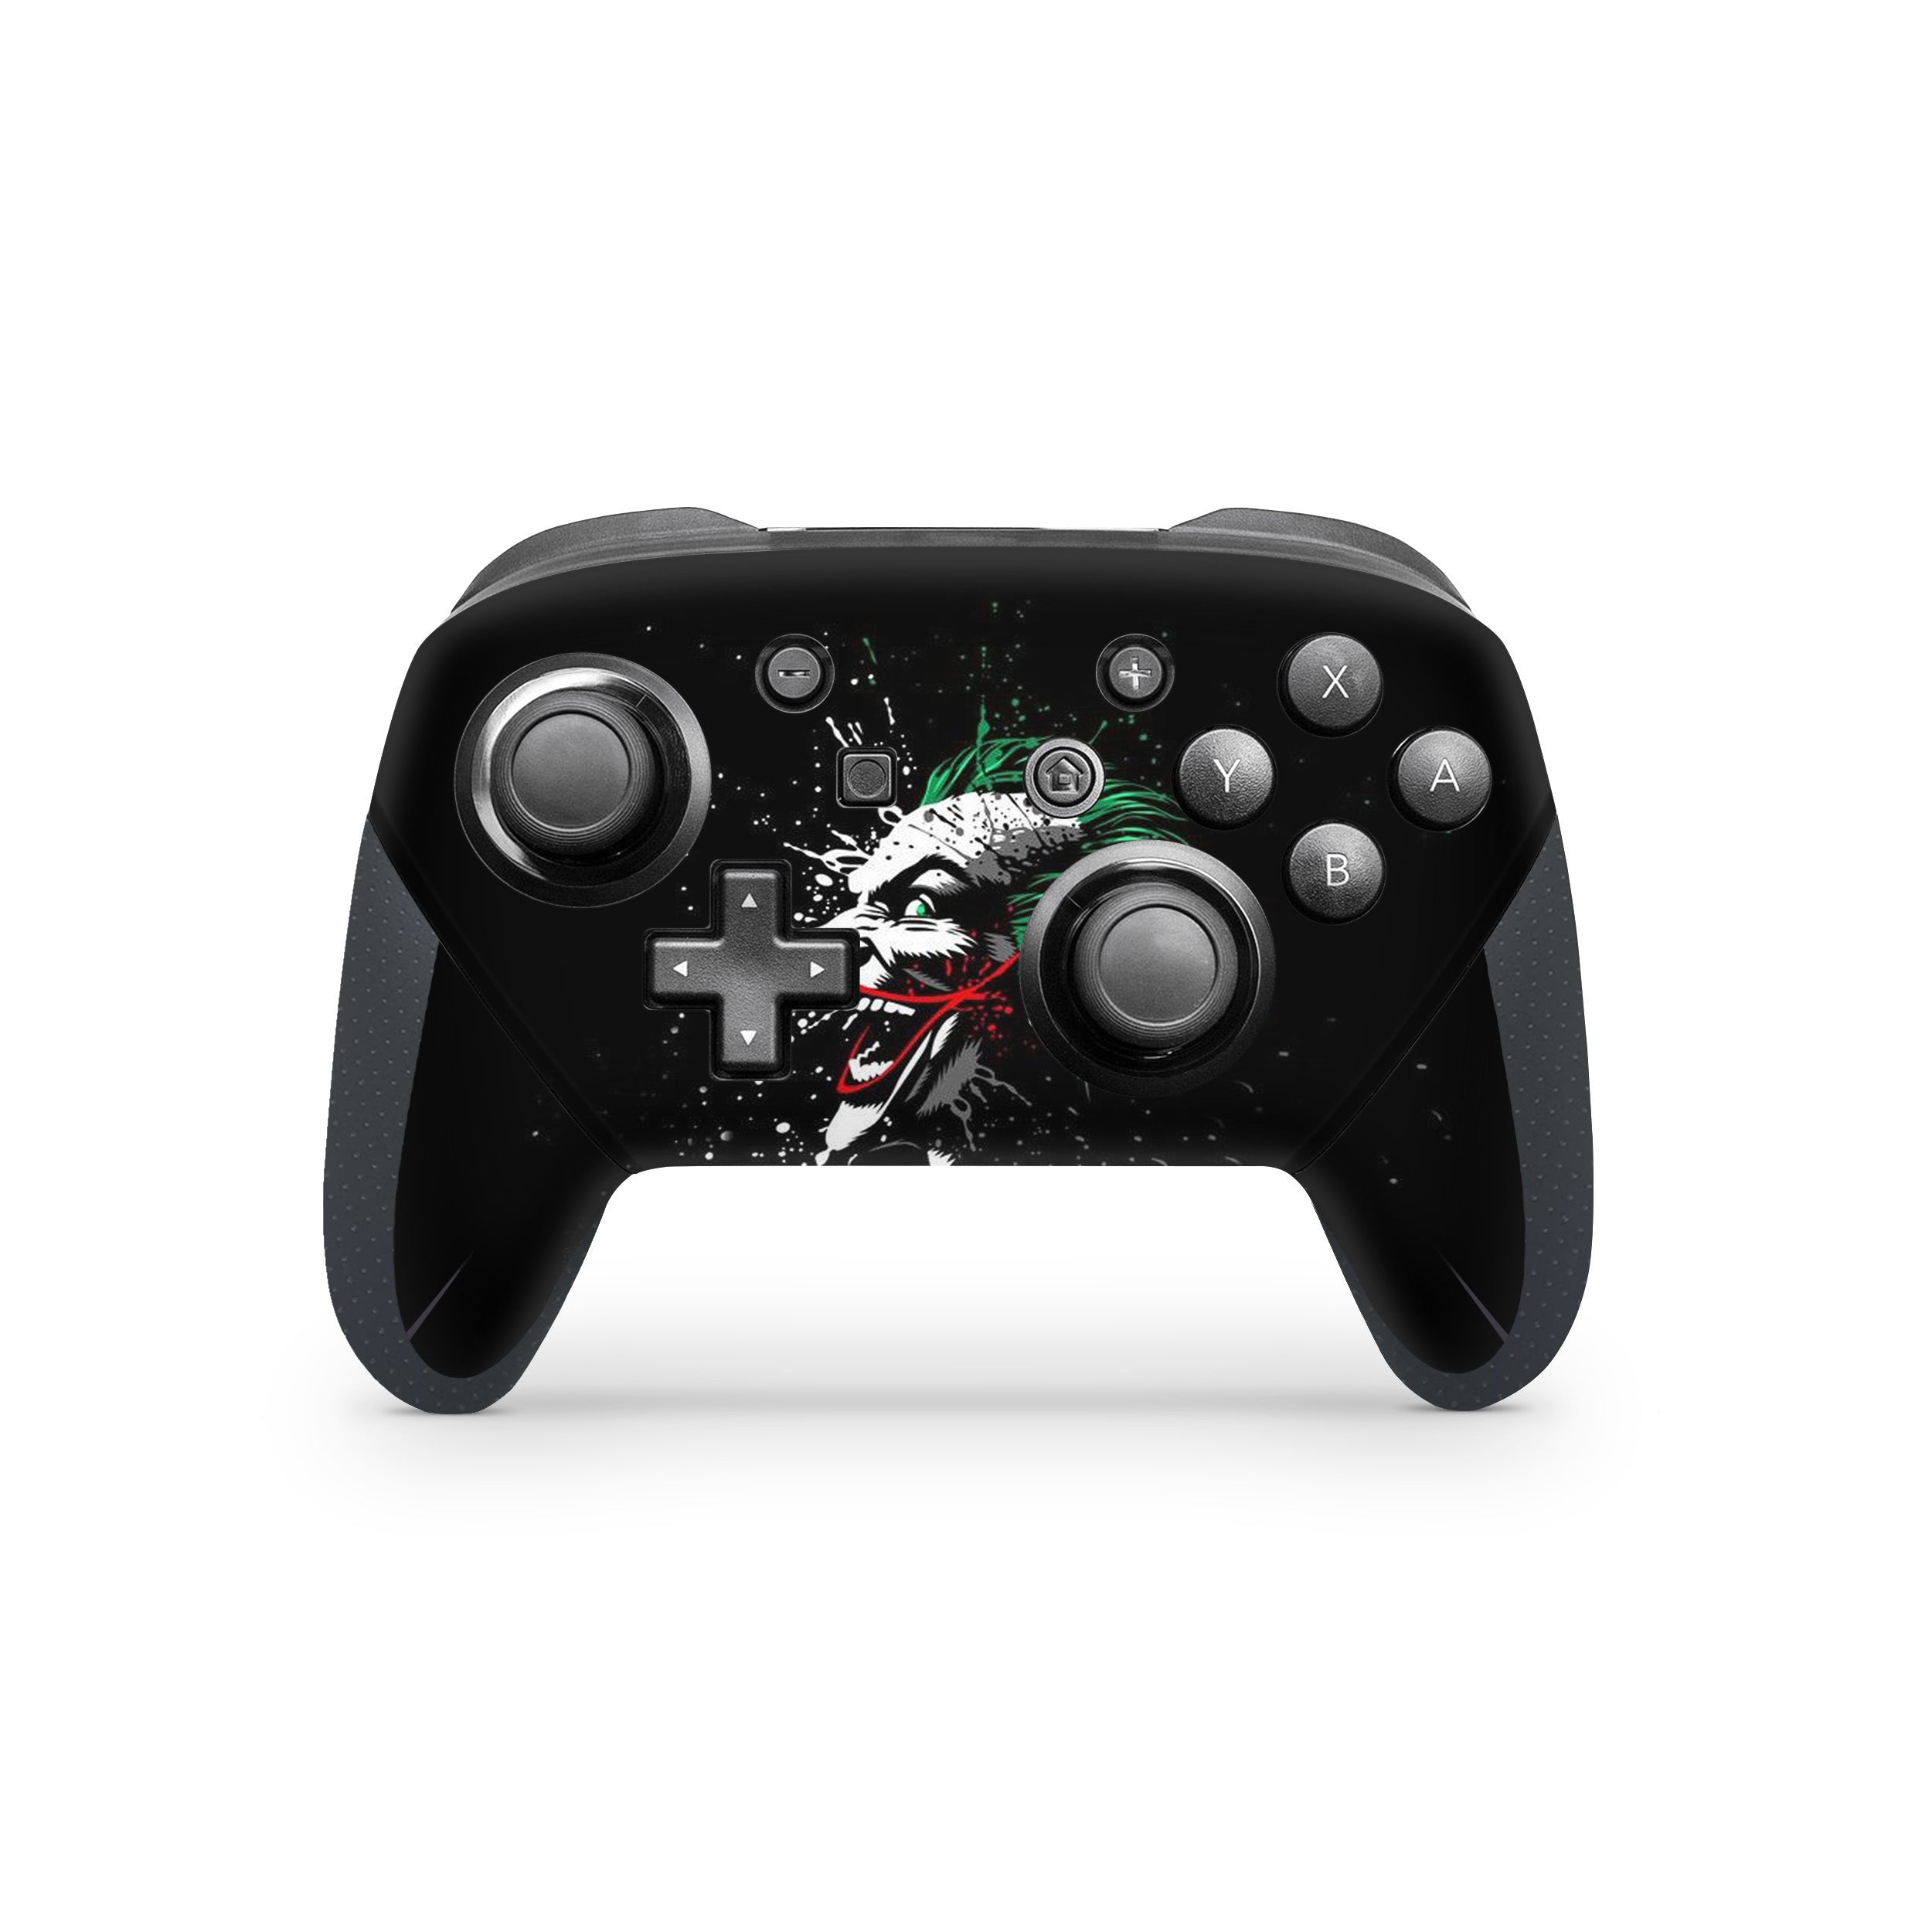 A video game skin featuring a DC Comics Joker design for the Switch Pro Controller.